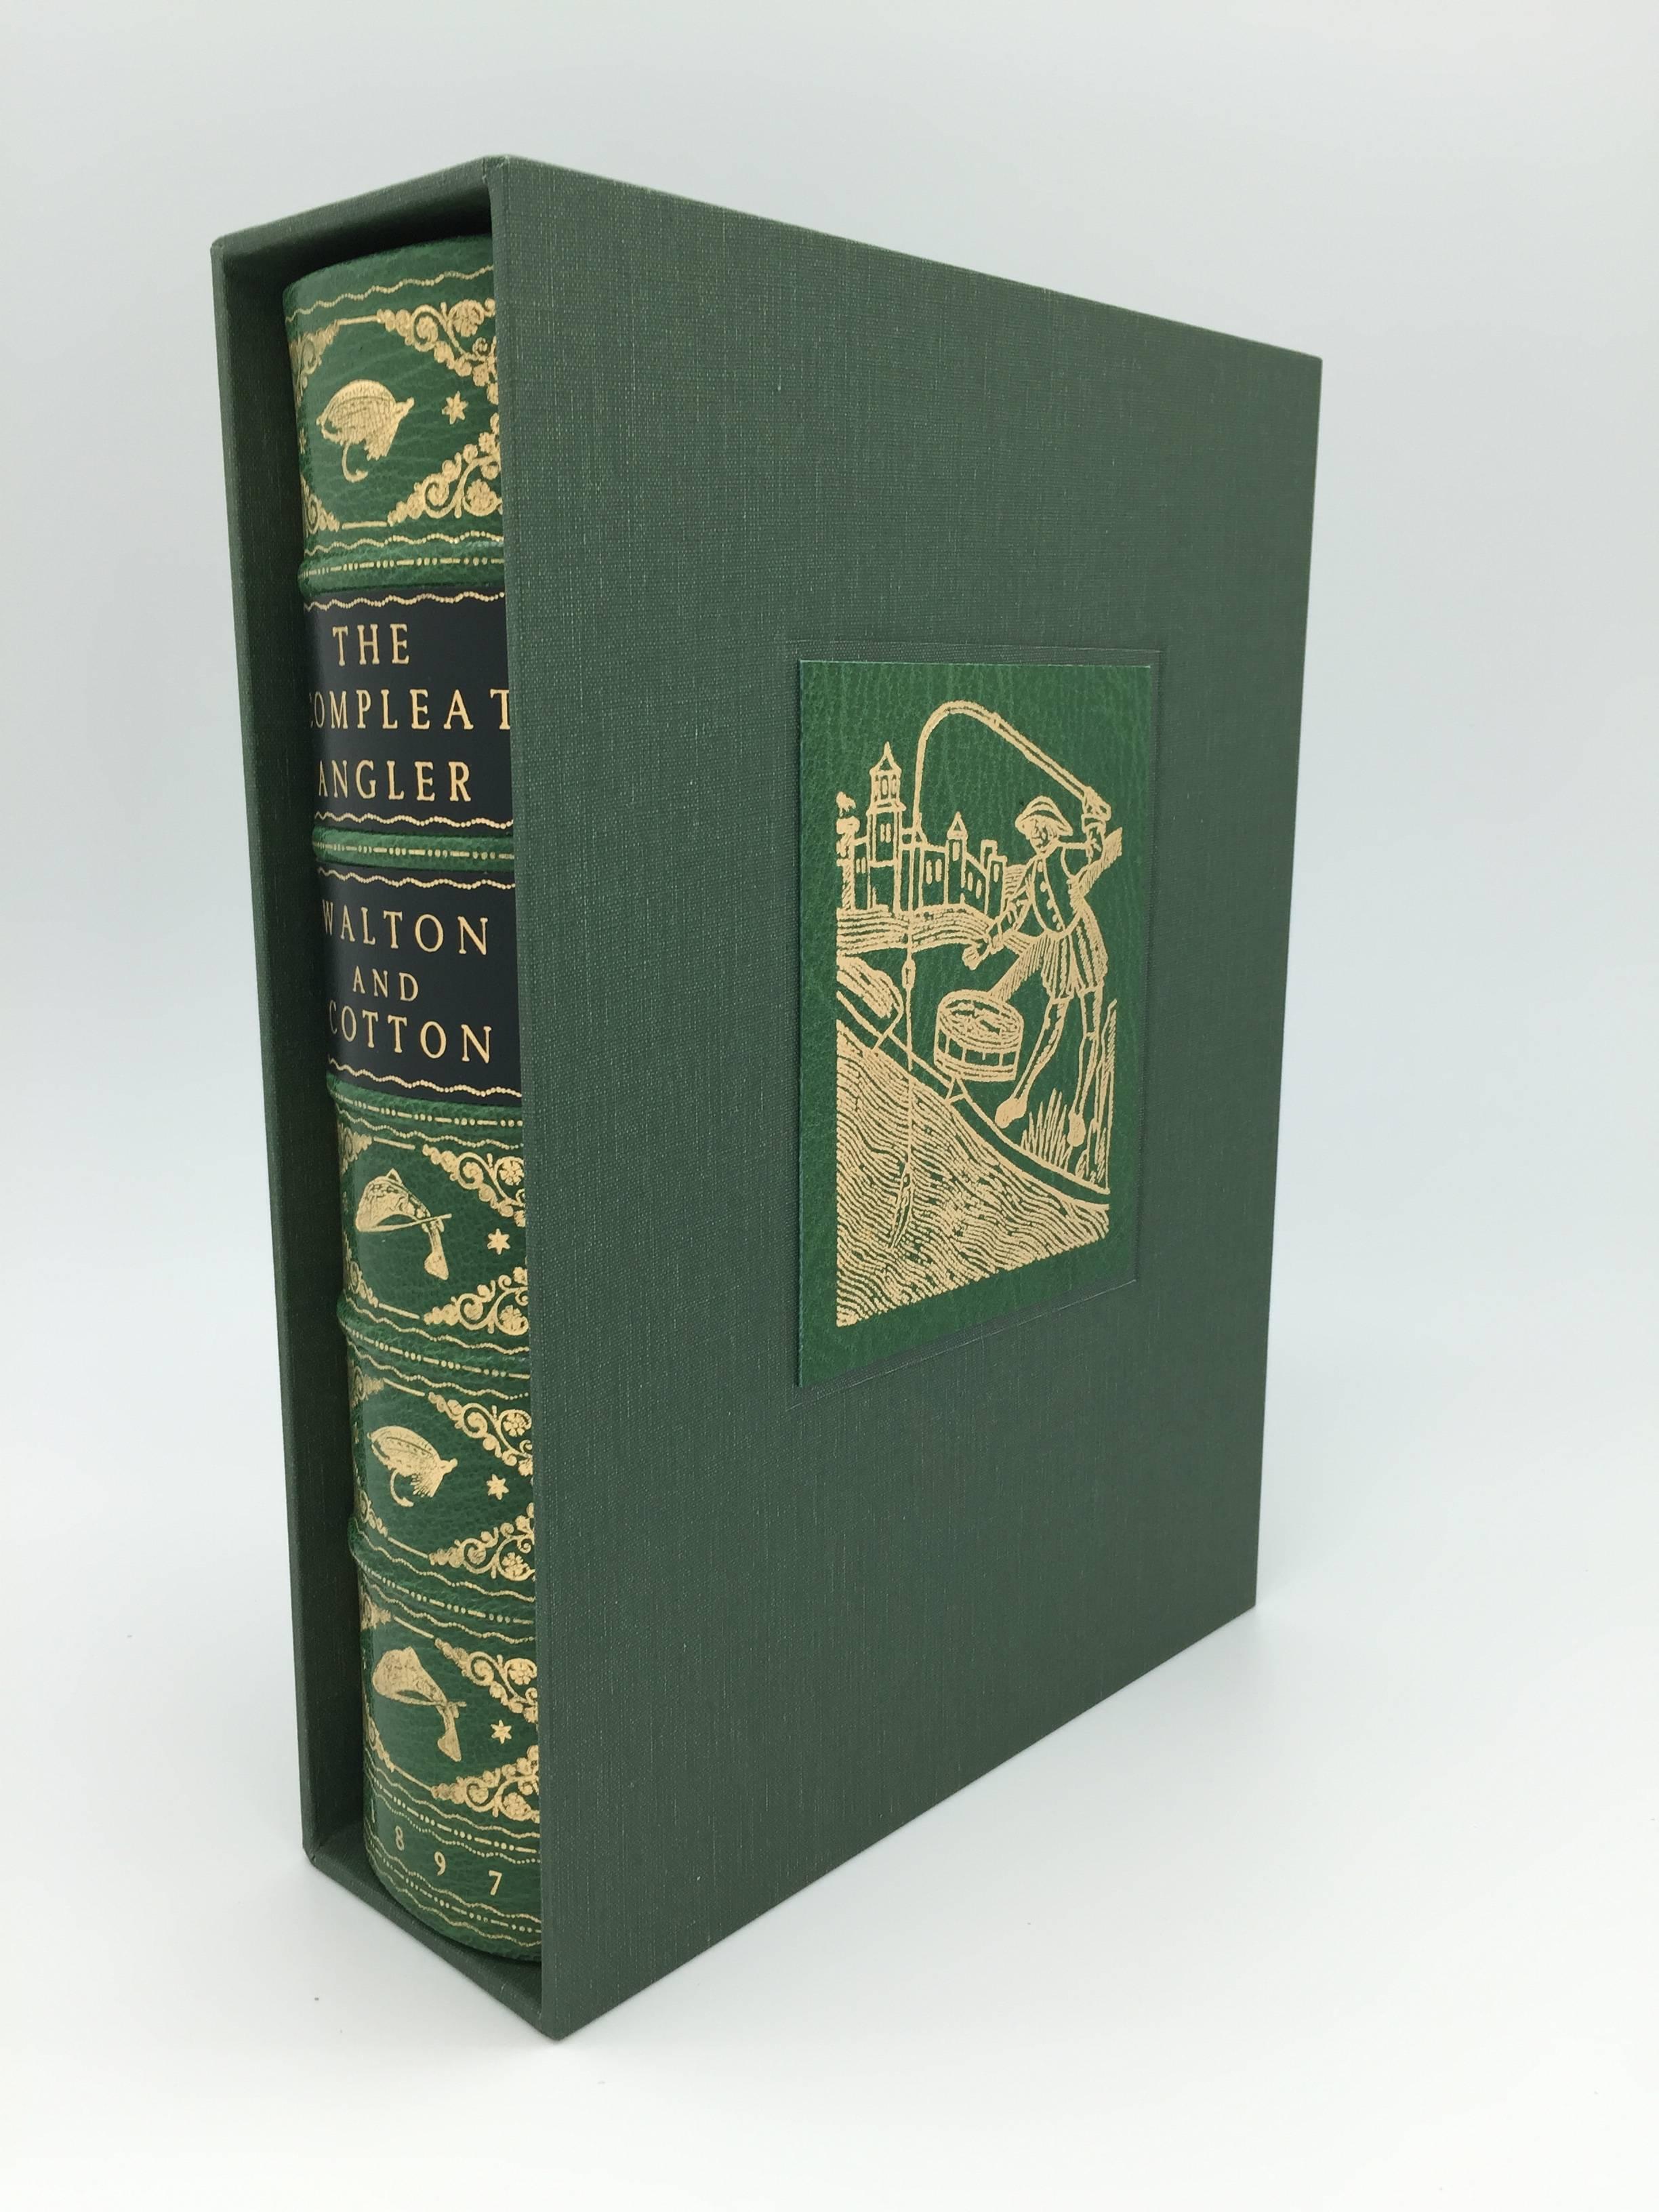 Walton, Izaak, Cotton, Charles, The Compleat Angler. New York/London: John Lane, 1897. Hand-bound in green leather with gilt tooling and custom slipcase. 

The Compleat Angler was first published in 1653 by Richard Marriot of St Dunstan-in-the-West